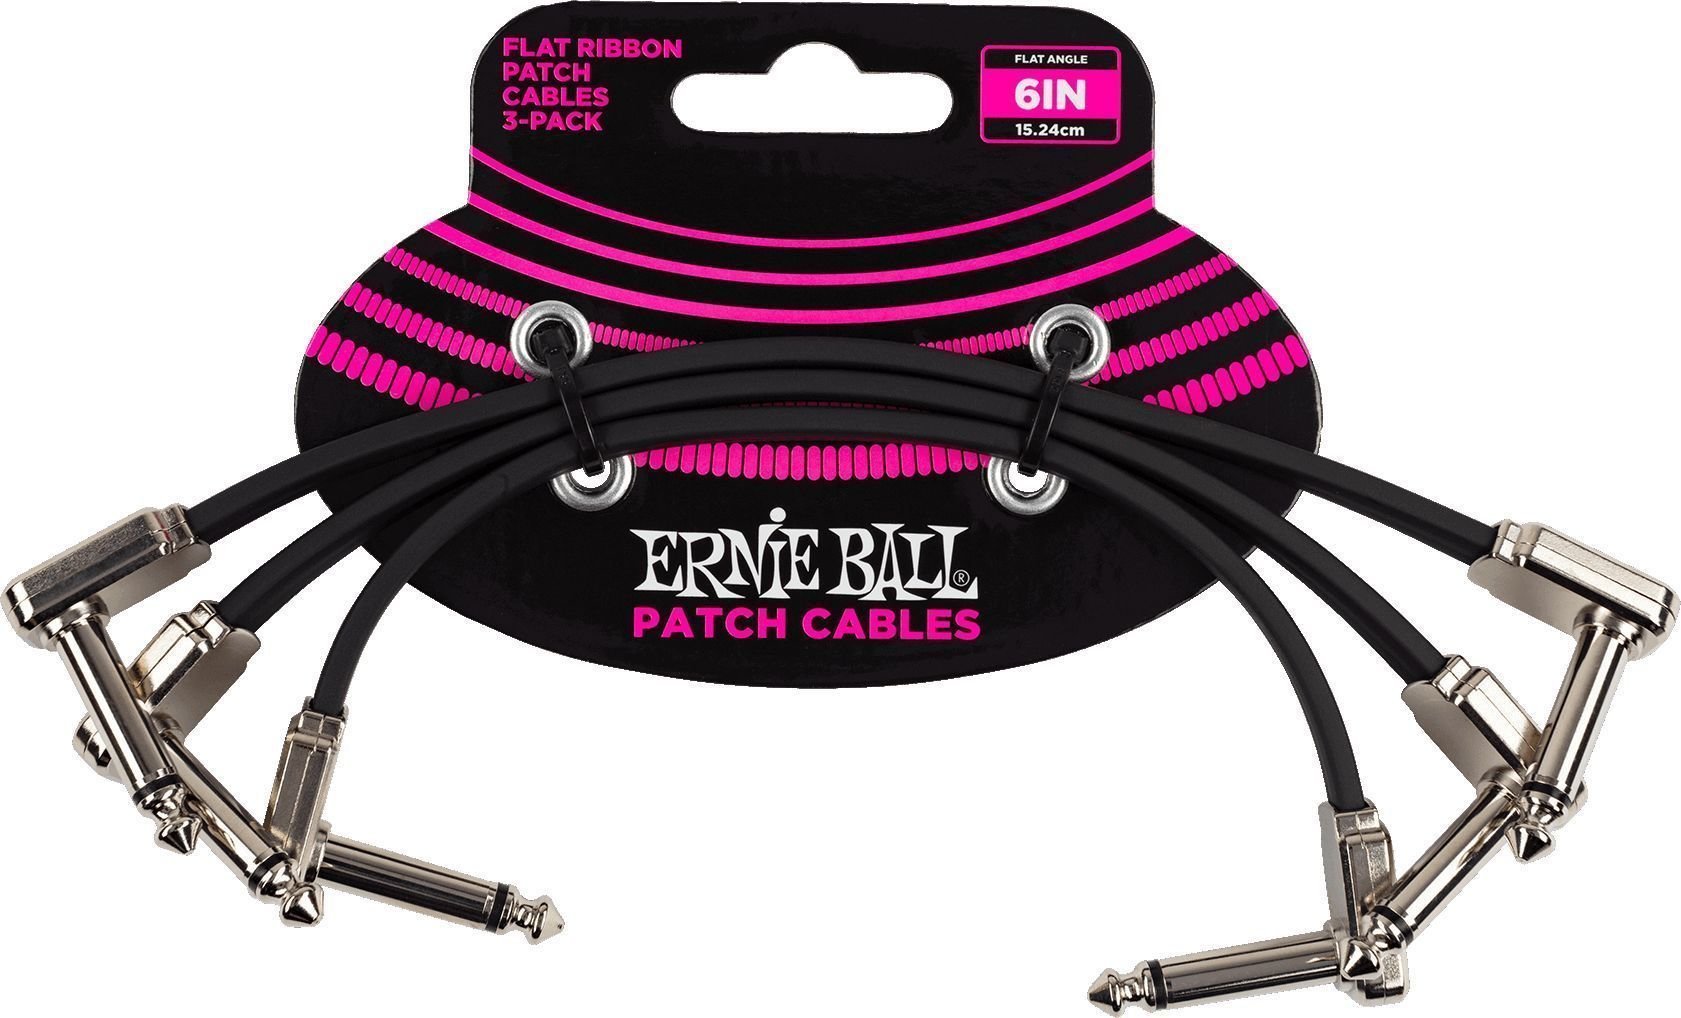 Adapter/Patch Cable Ernie Ball P06221 Black 15 cm Angled - Angled